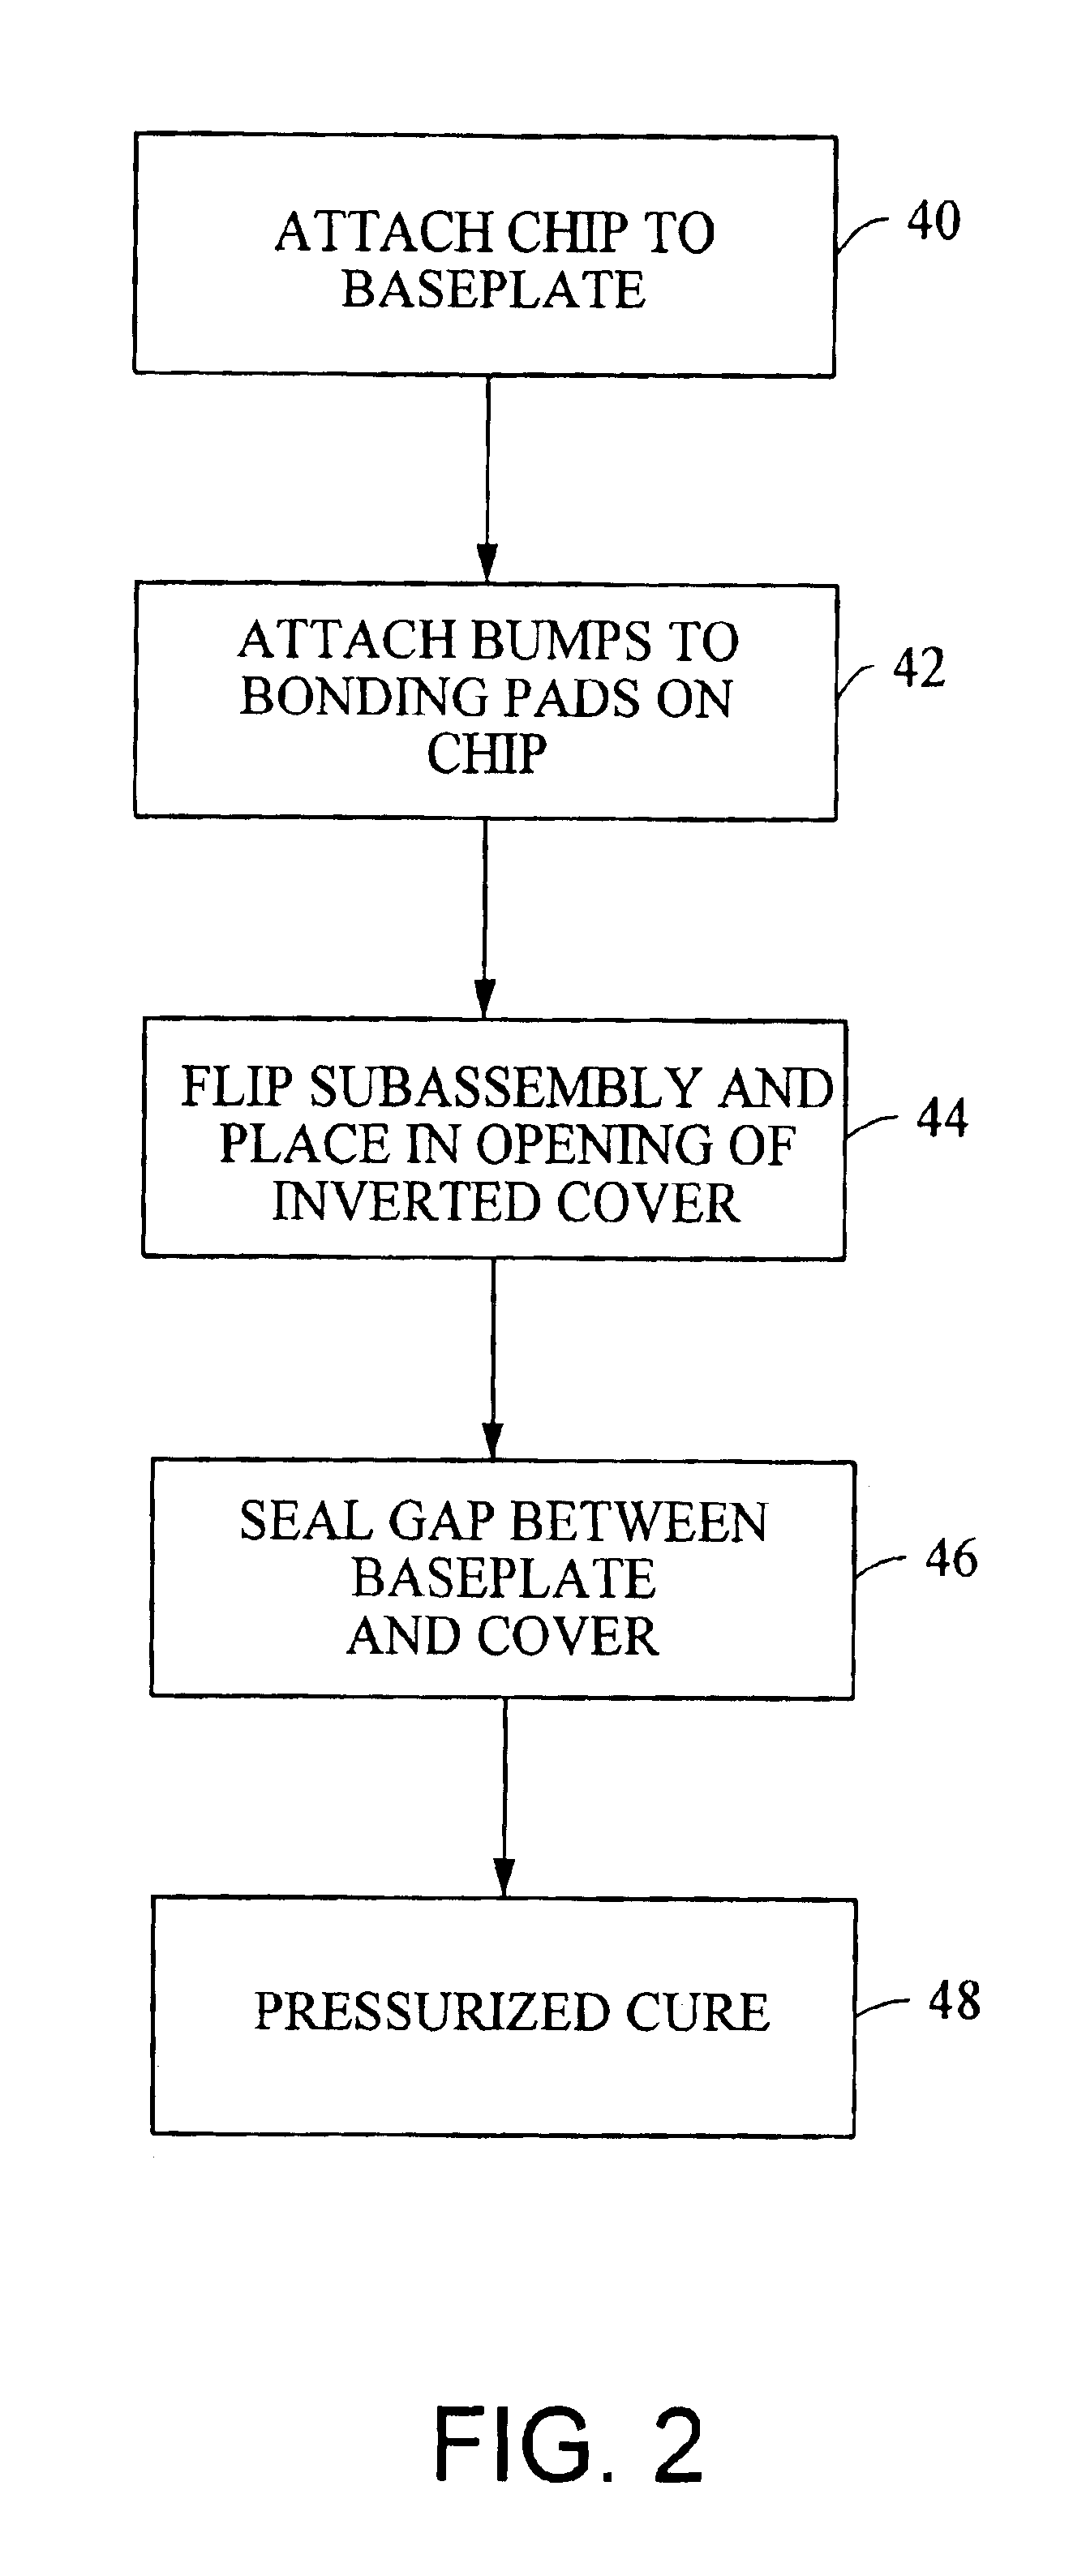 Method of packaging a device with a lead frame, and an apparatus formed therefrom